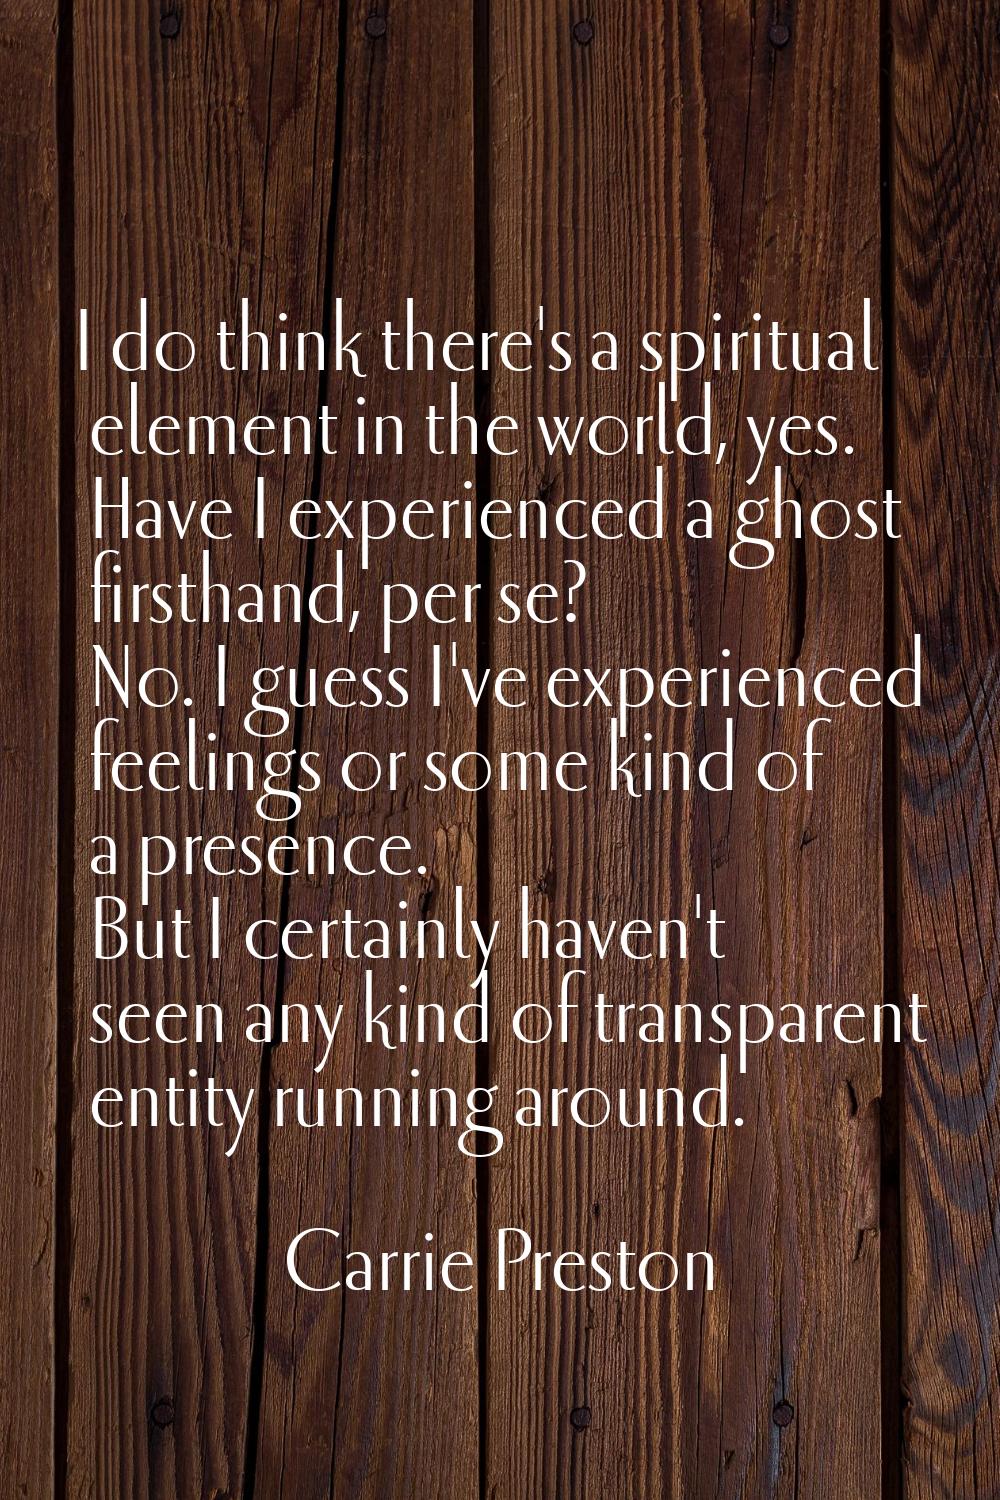 I do think there's a spiritual element in the world, yes. Have I experienced a ghost firsthand, per